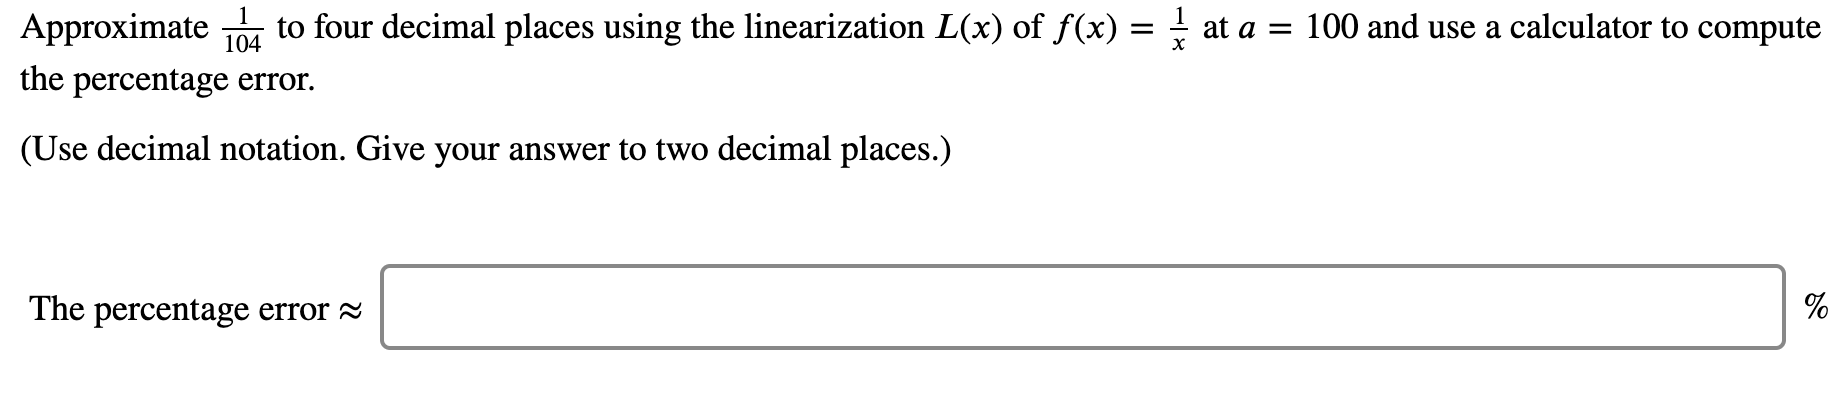 Approximate
to four decimal places using the linearization L(x) of f(x) = at a = 100 and use a calculator to compute
104
the percentage error.
(Use decimal notation. Give your answer to two decimal places.)
The percentage error 2
%
